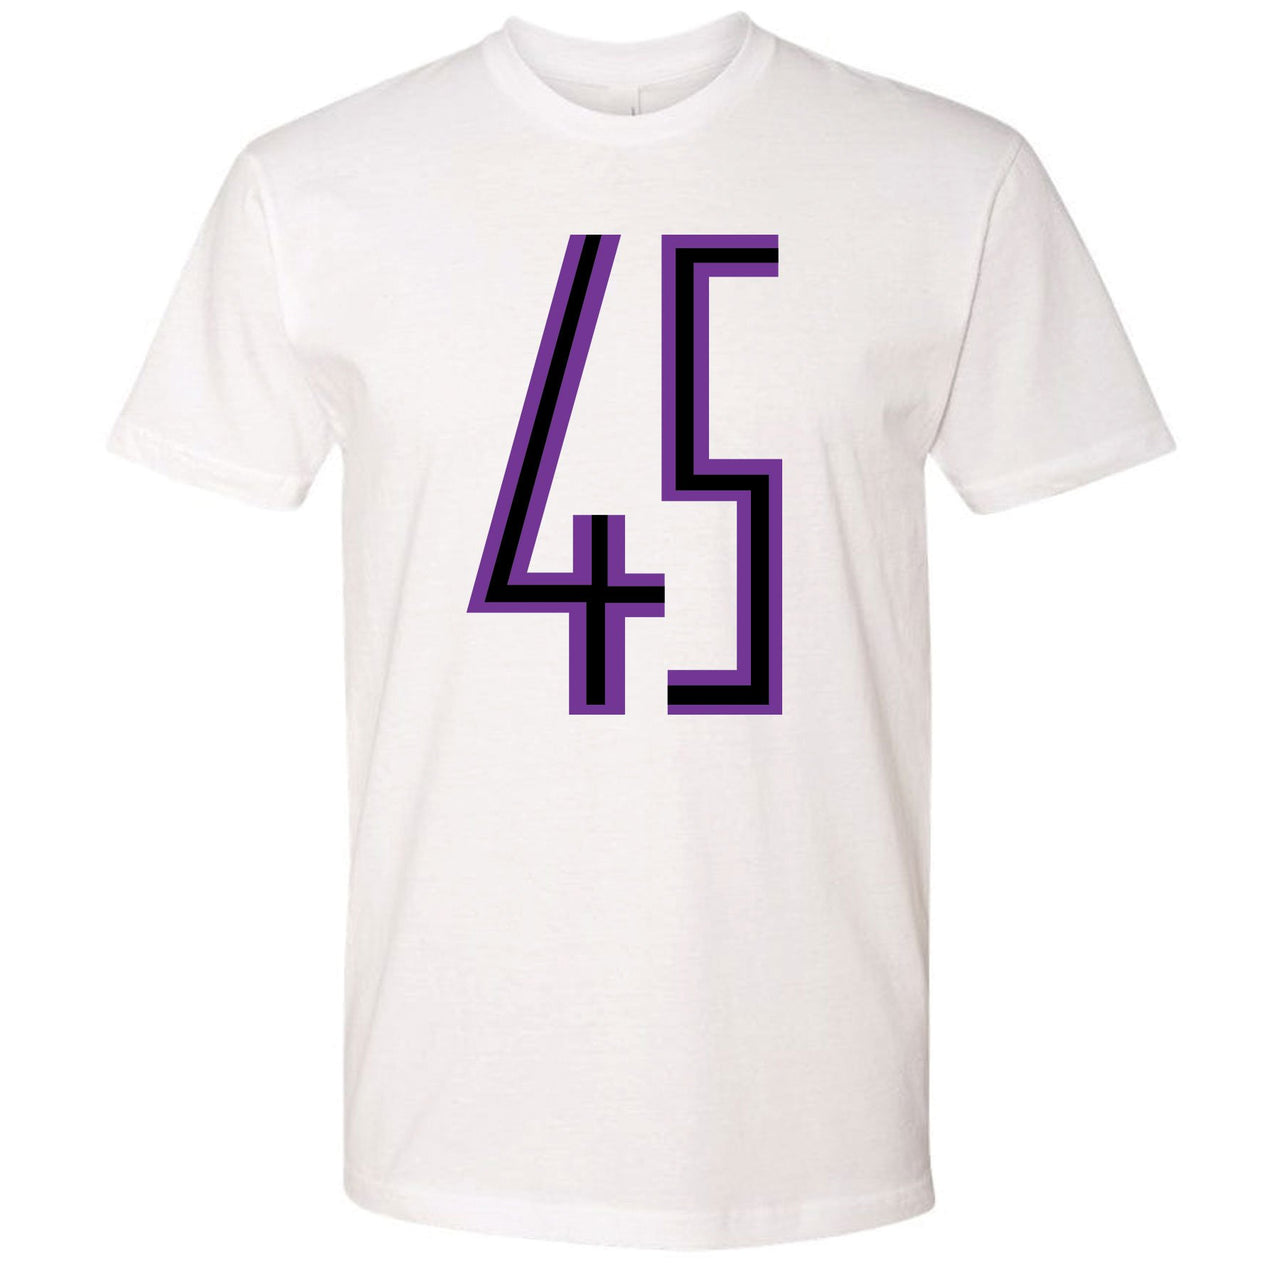 Printed on the front of the Jordan 11 Concord 45s white sneaker matching t-shirt is the Jordan 45 logo printed in black and purple